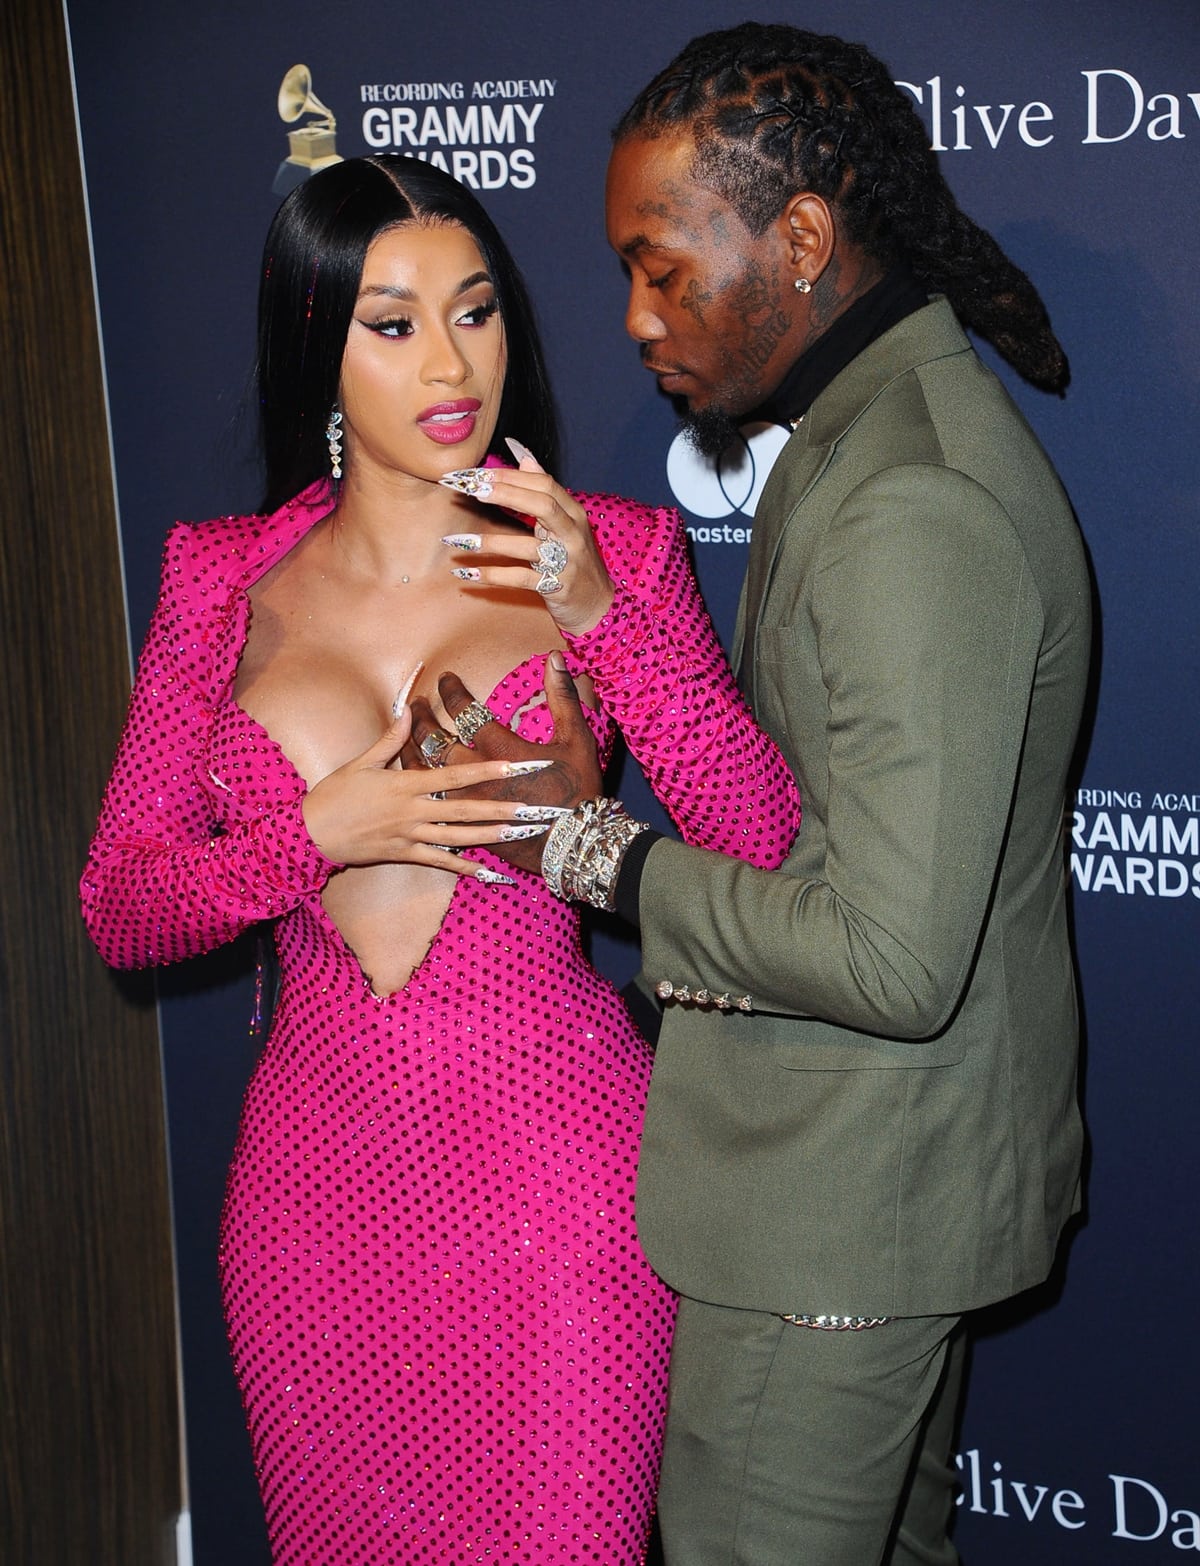 Cardi B and Offset welcomed their baby boy Wave Set Cephus in September 2021